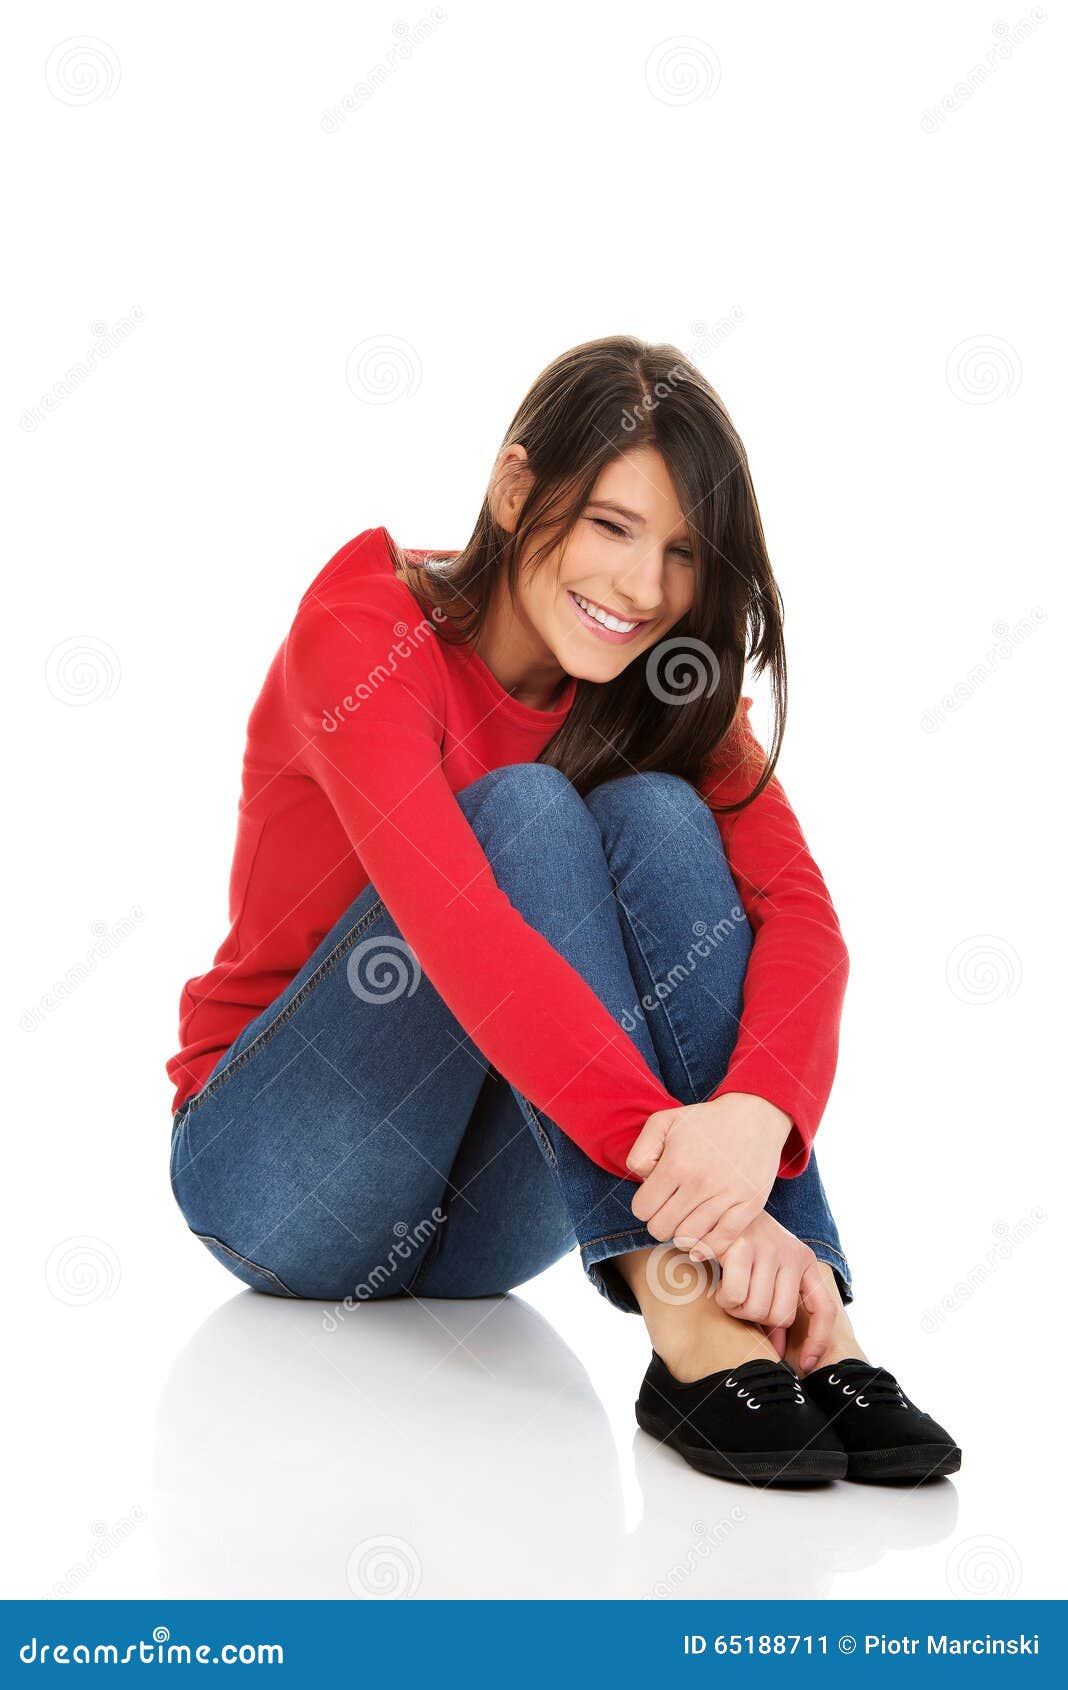 Relaxing Woman Sitting on the Floor. Stock Image - Image of friendly ...